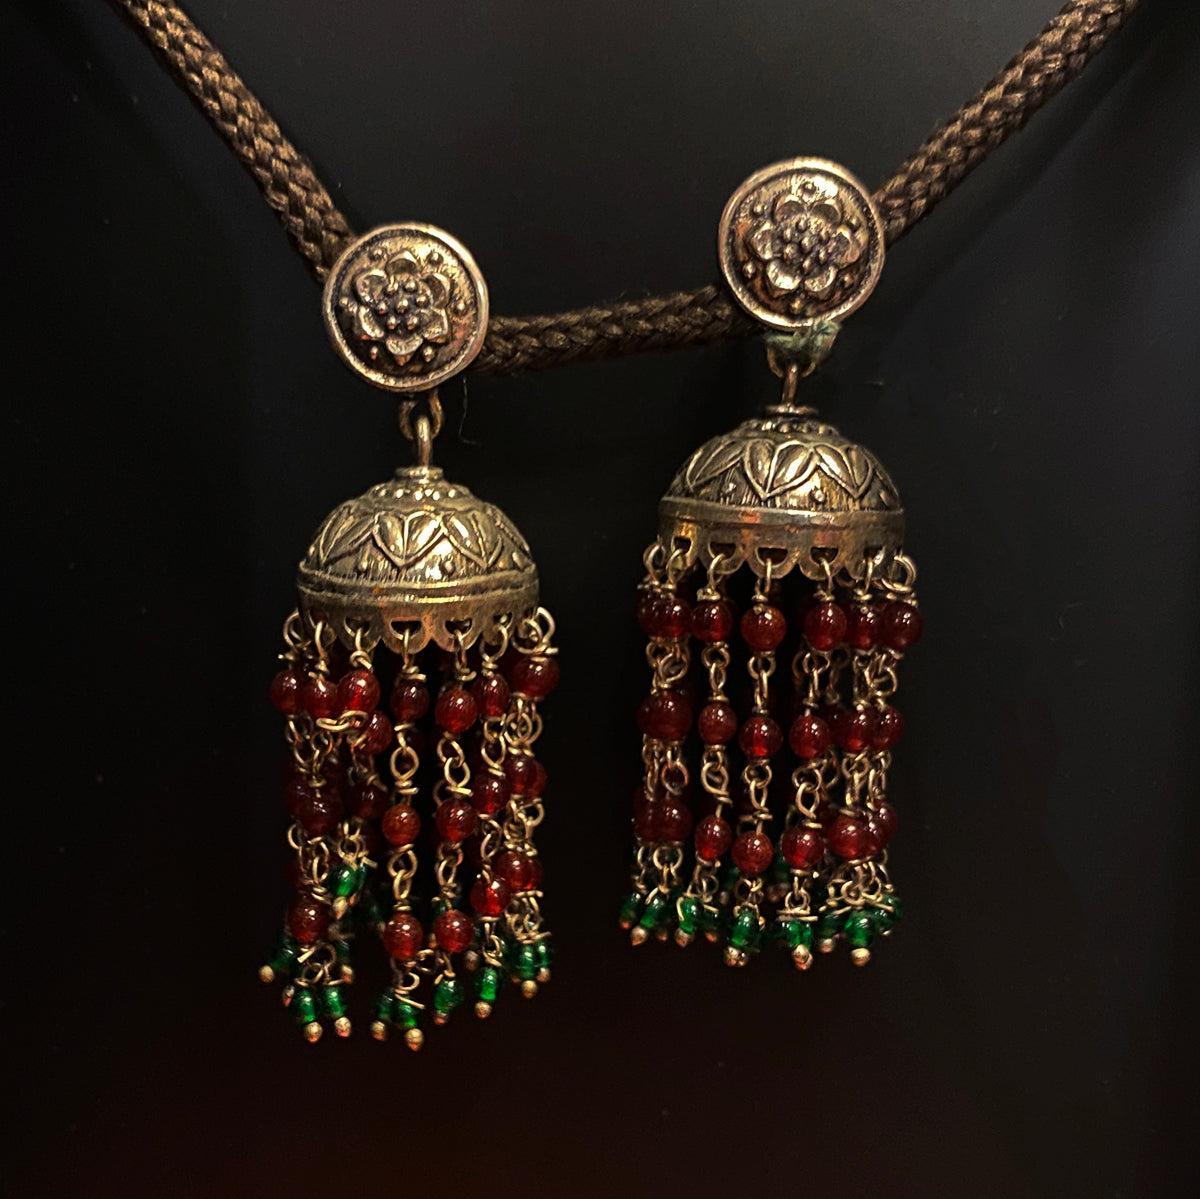 Silver Indian Jhumka Earrings with Garnet and Emerald Beads - Vintage India NYC